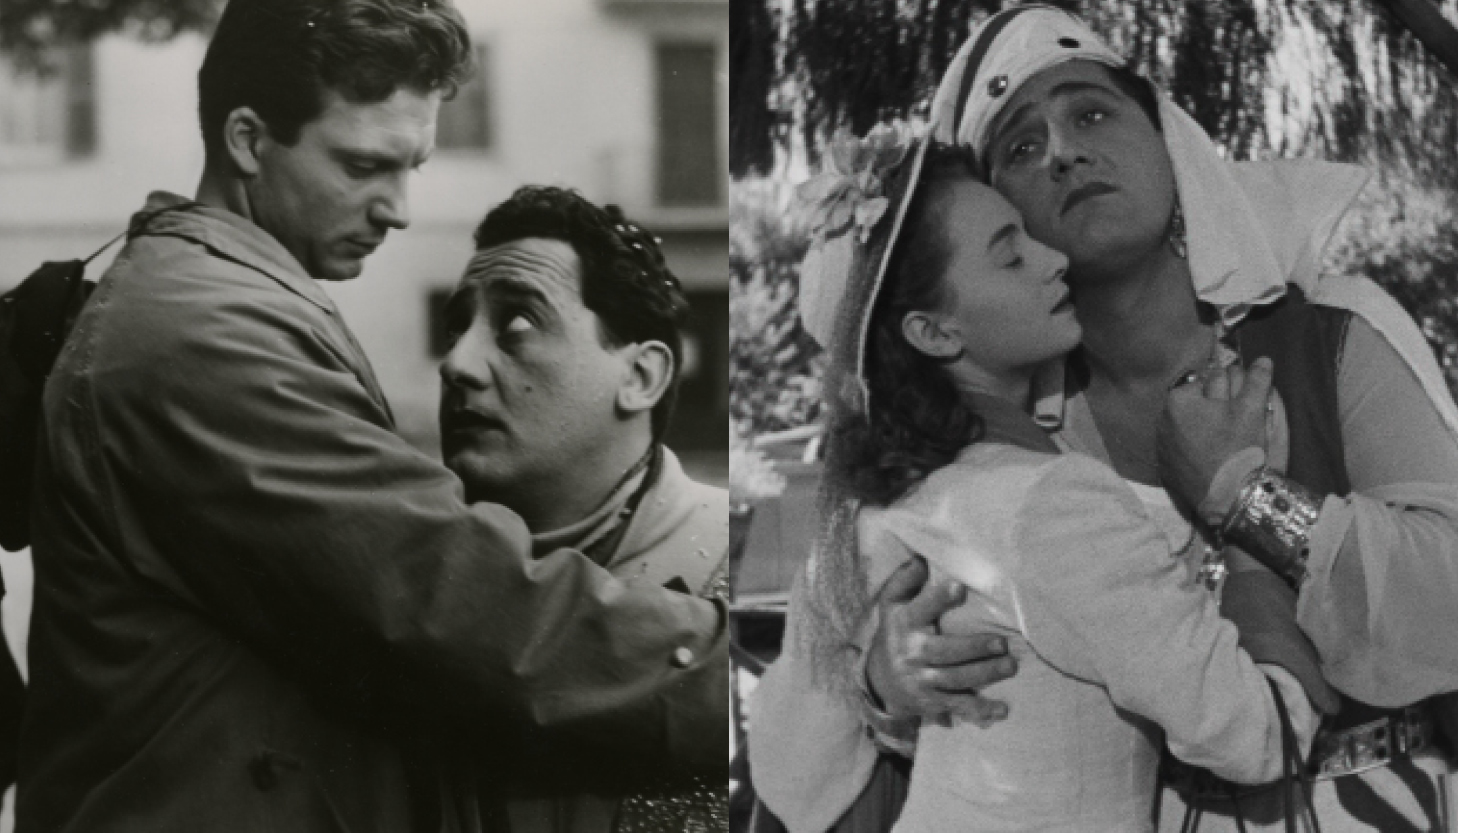 From left to right: Black-and-white still from I vitelloni, featuring Fausto (Franco Fabrizi), Alberto (Alberto Sordi), and Gisella (Vira Silenti). Fausto (left) is looking down at Alberto, his hand on Alberto’s shoulder as if to console him. Gisella is standing in the background watching them; Black-and-white still from The White Sheik featuring Wanda (Brunella Bovo) and Fernando (Alberto Sordin) embracing. Wanda (left) is wearing a dress and hat, and Fernando (right) is wearing a Sheik headdress.